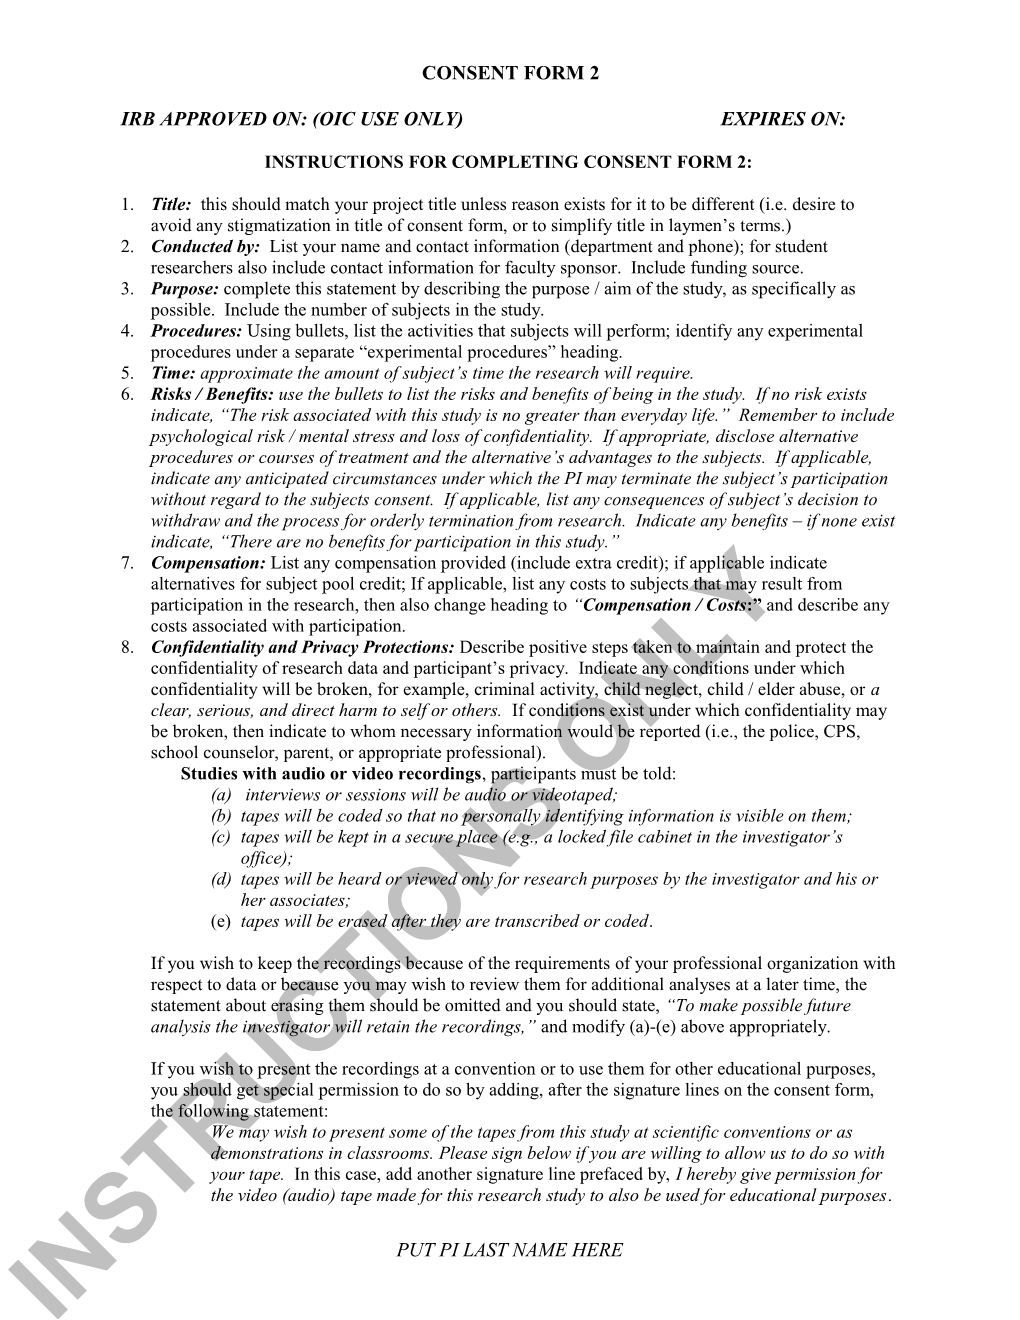 Instructions for Completing Consent Form 2